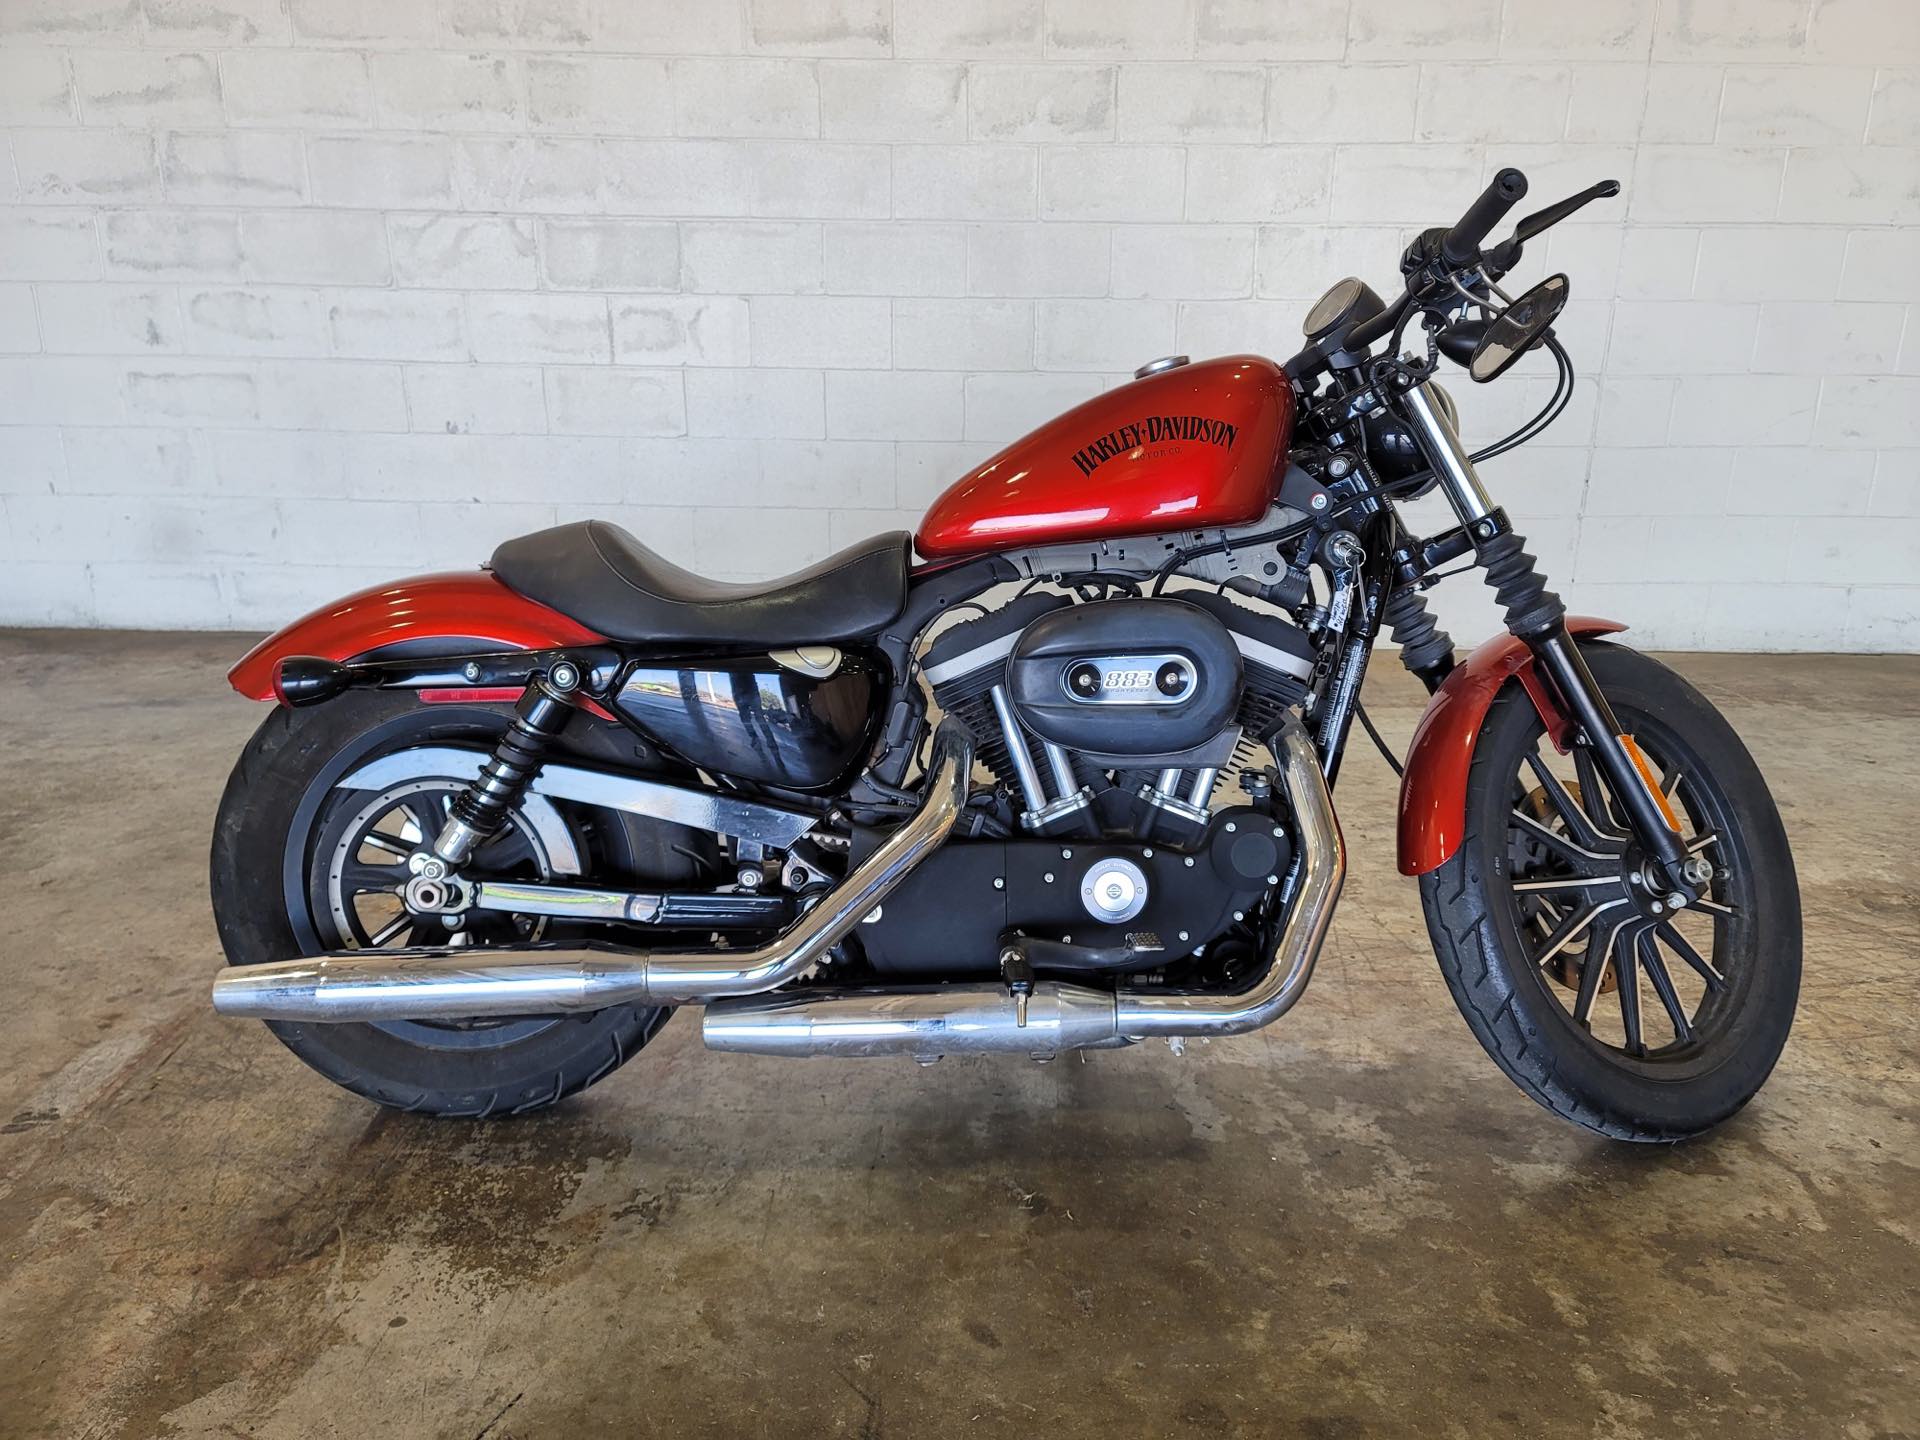 2013 Harley-Davidson Sportster 883 at Twisted Cycles